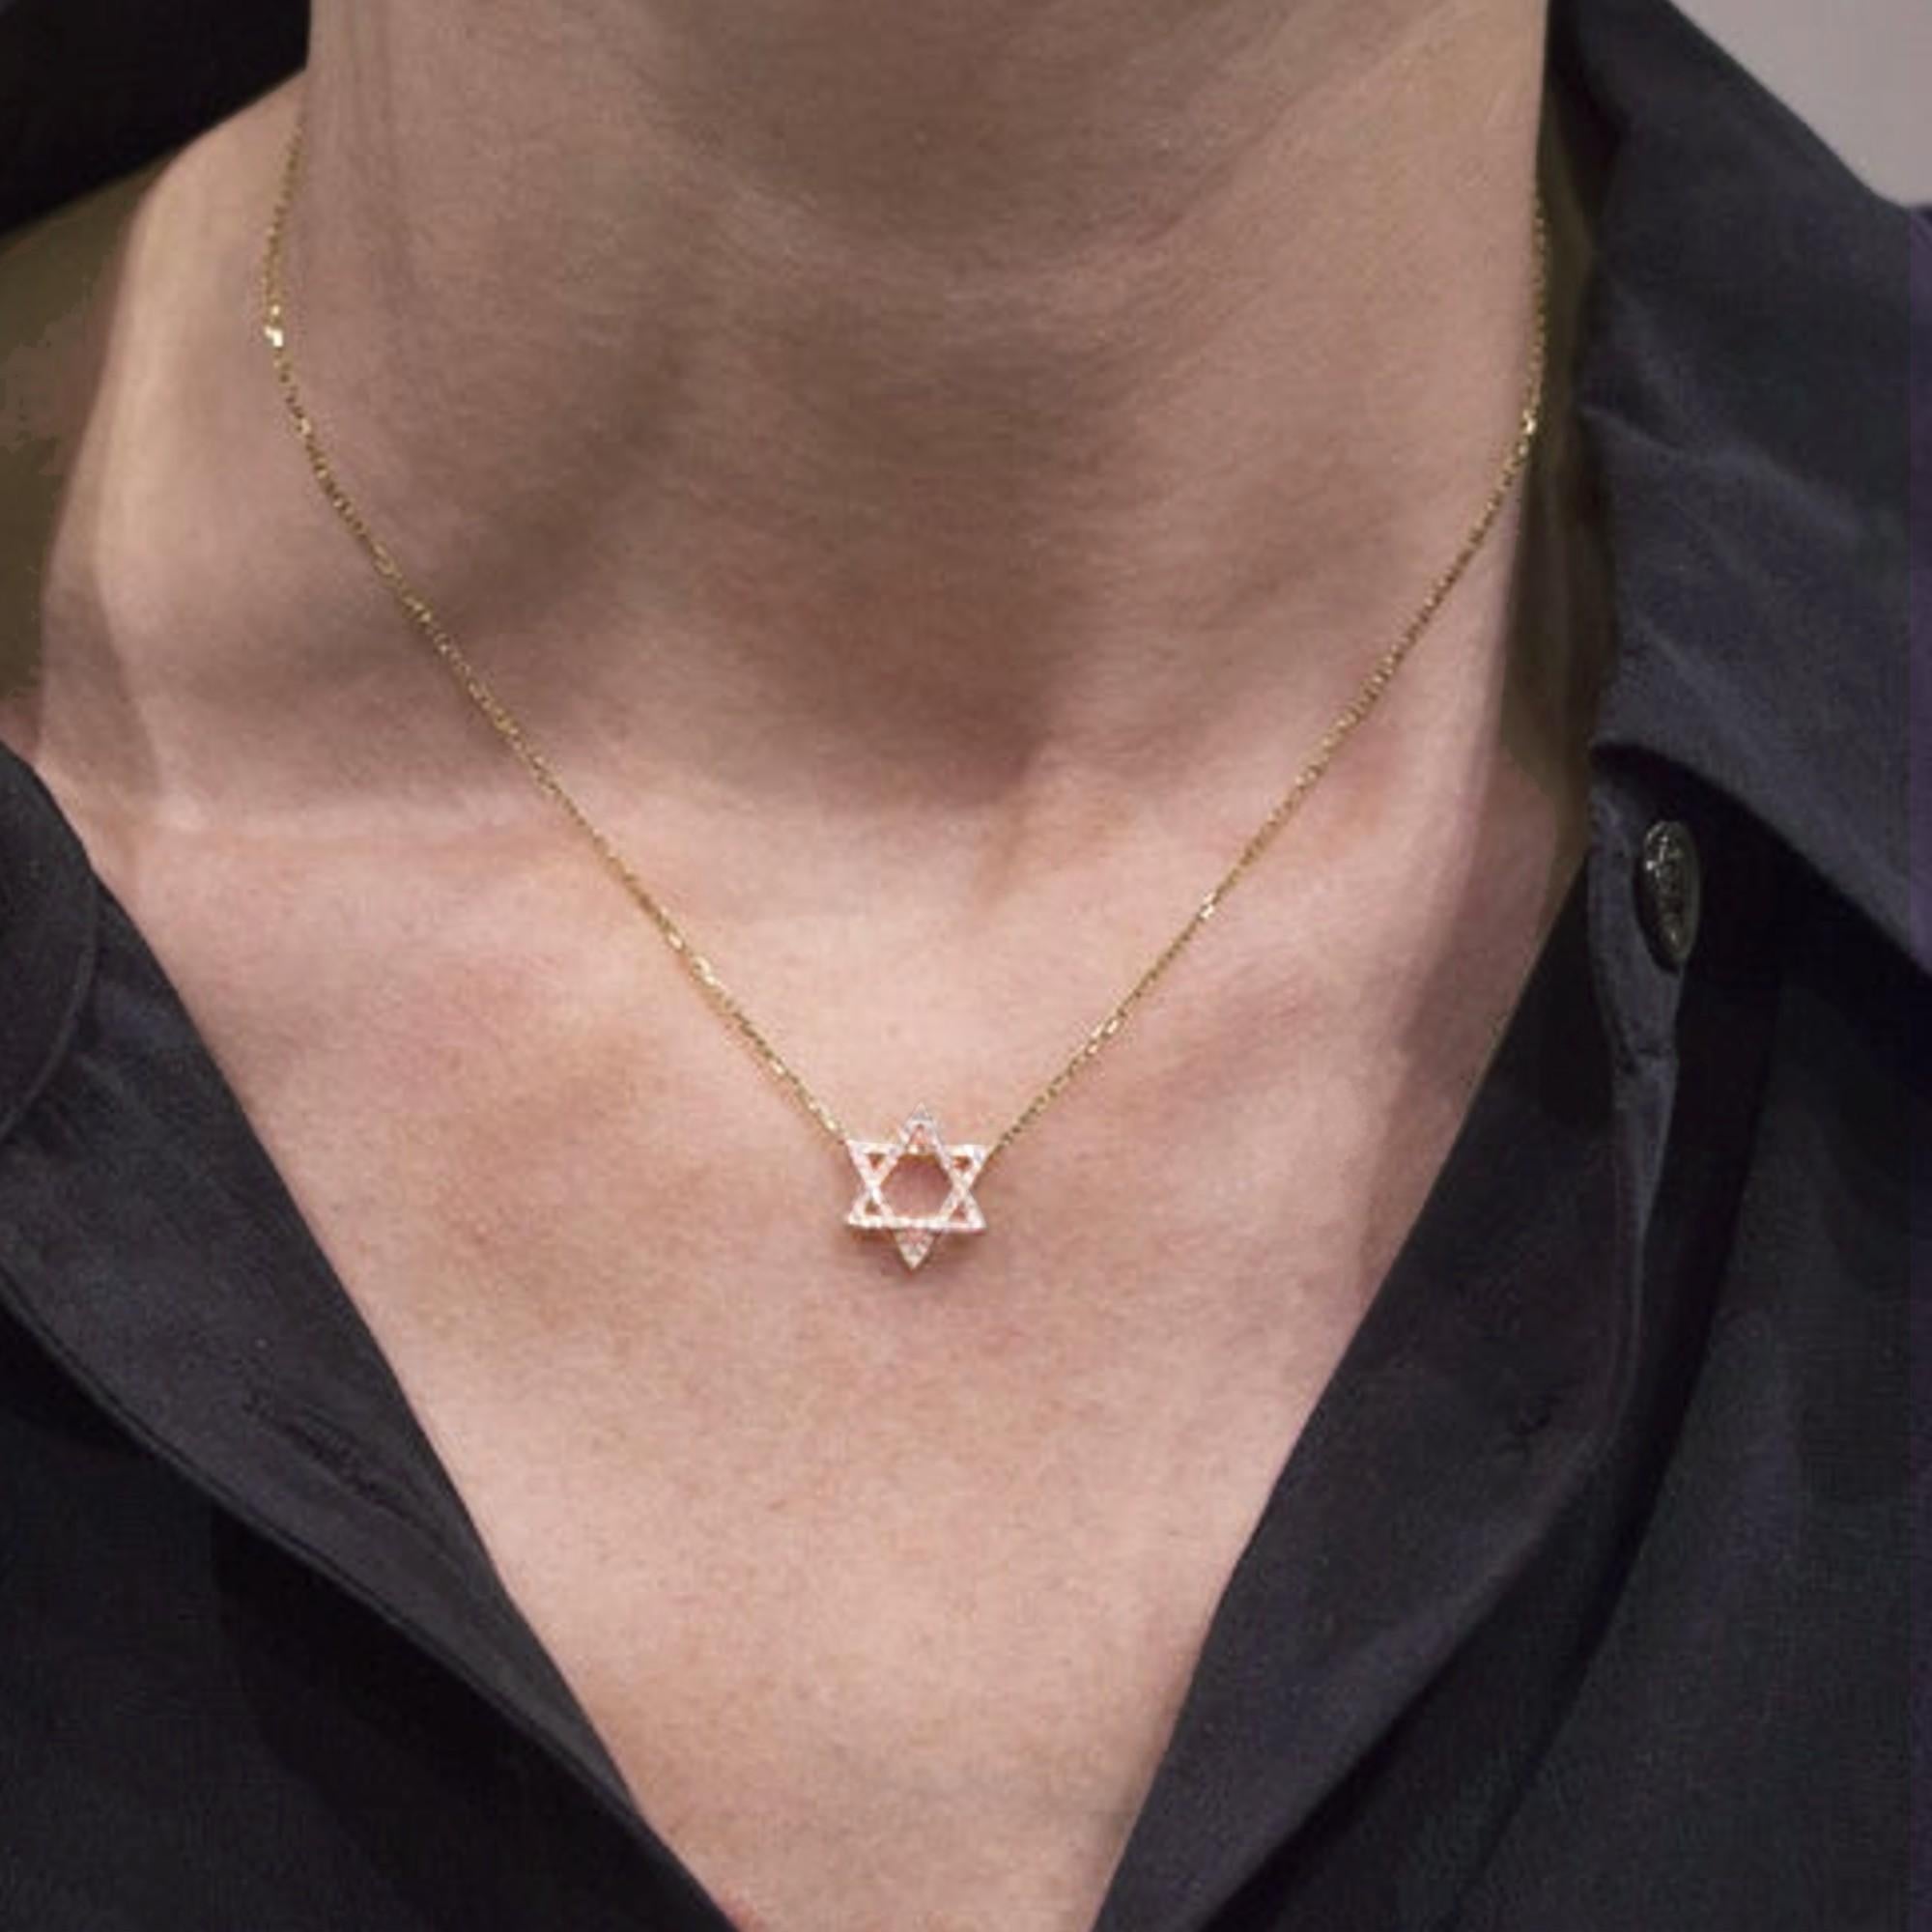 Alex Jona design collection, hand crafted in Italy, 18 karat yellow gold 0.18 carats white diamond Magen David pendant, mounted on a 18 karat yellow gold chain 16.5inch-45cm long.

Dimensions:
0.57 in Diameter / 0.12 in Depth
14.5 mm Diameter / 3.2